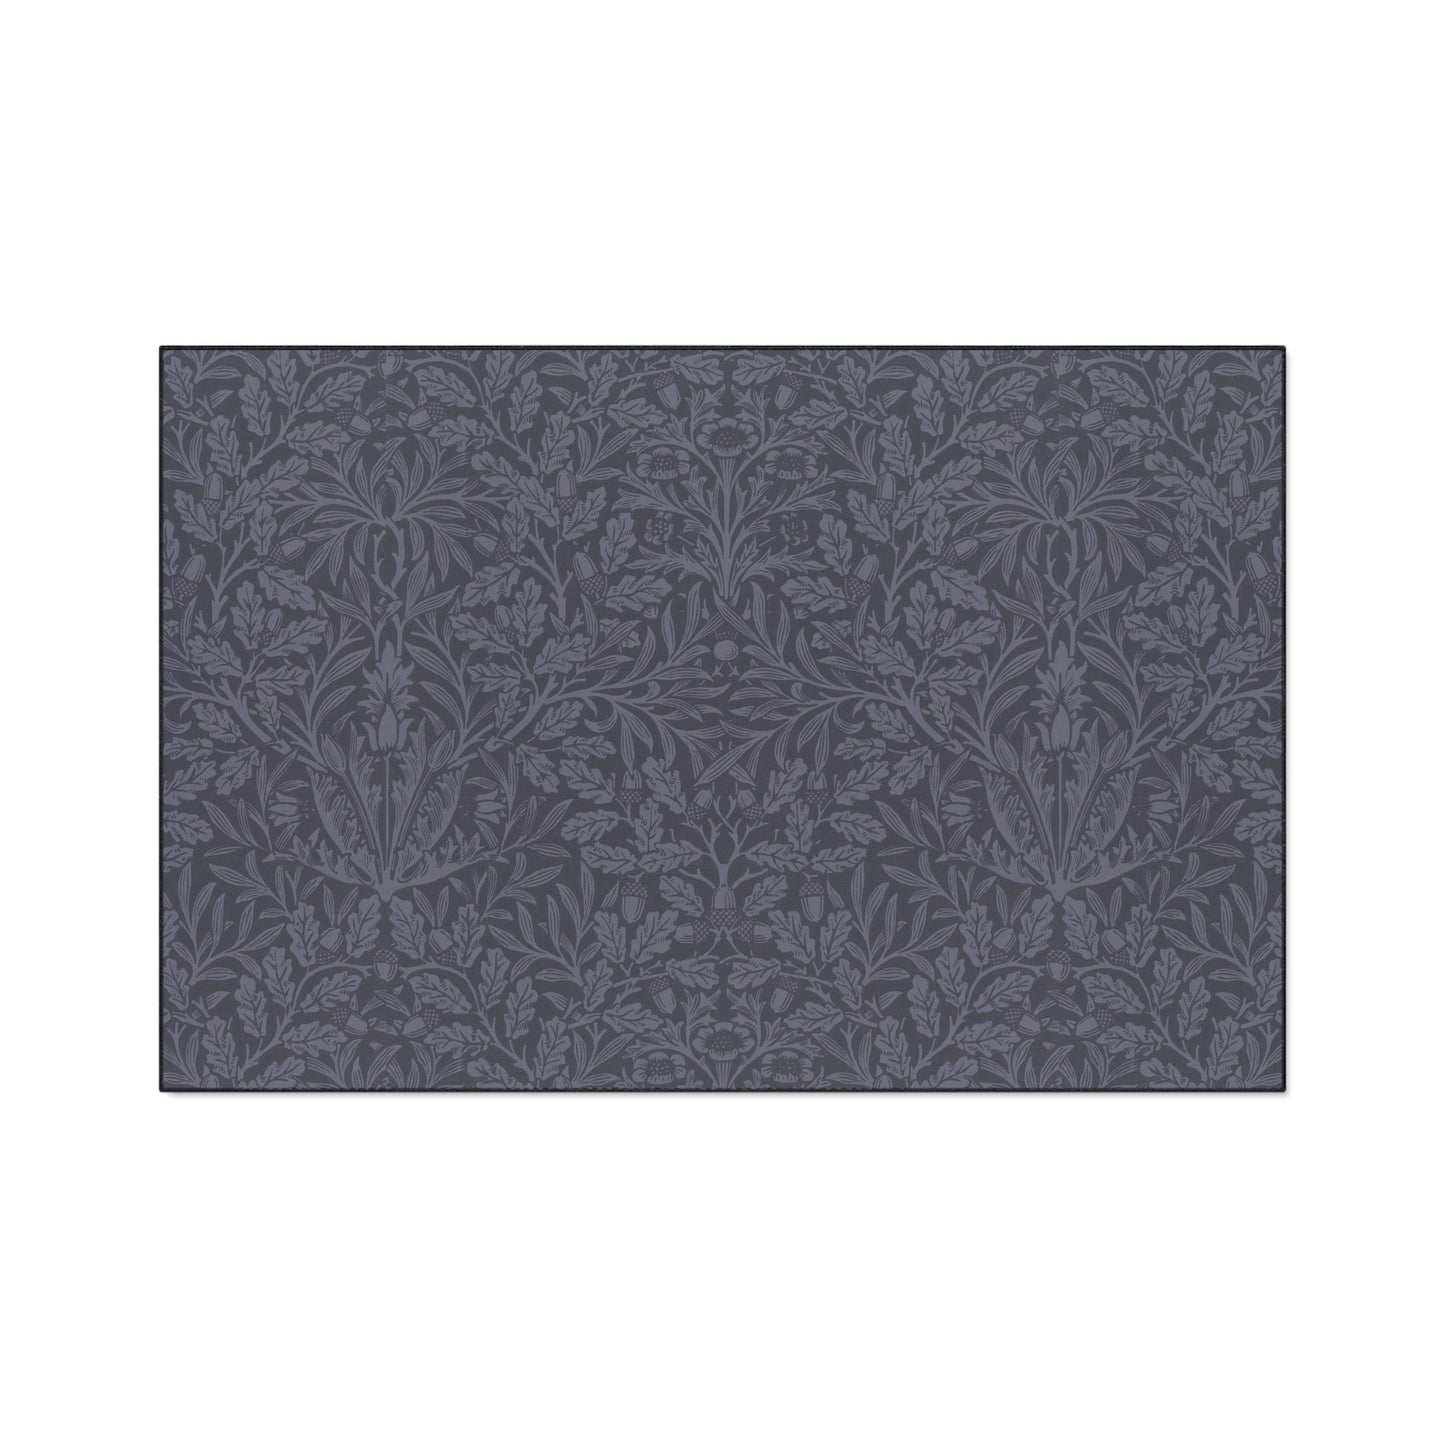 william-morris-co-heavy-duty-floor-mat-acorns-and-oak-leaves-collection-smoky-blue-1